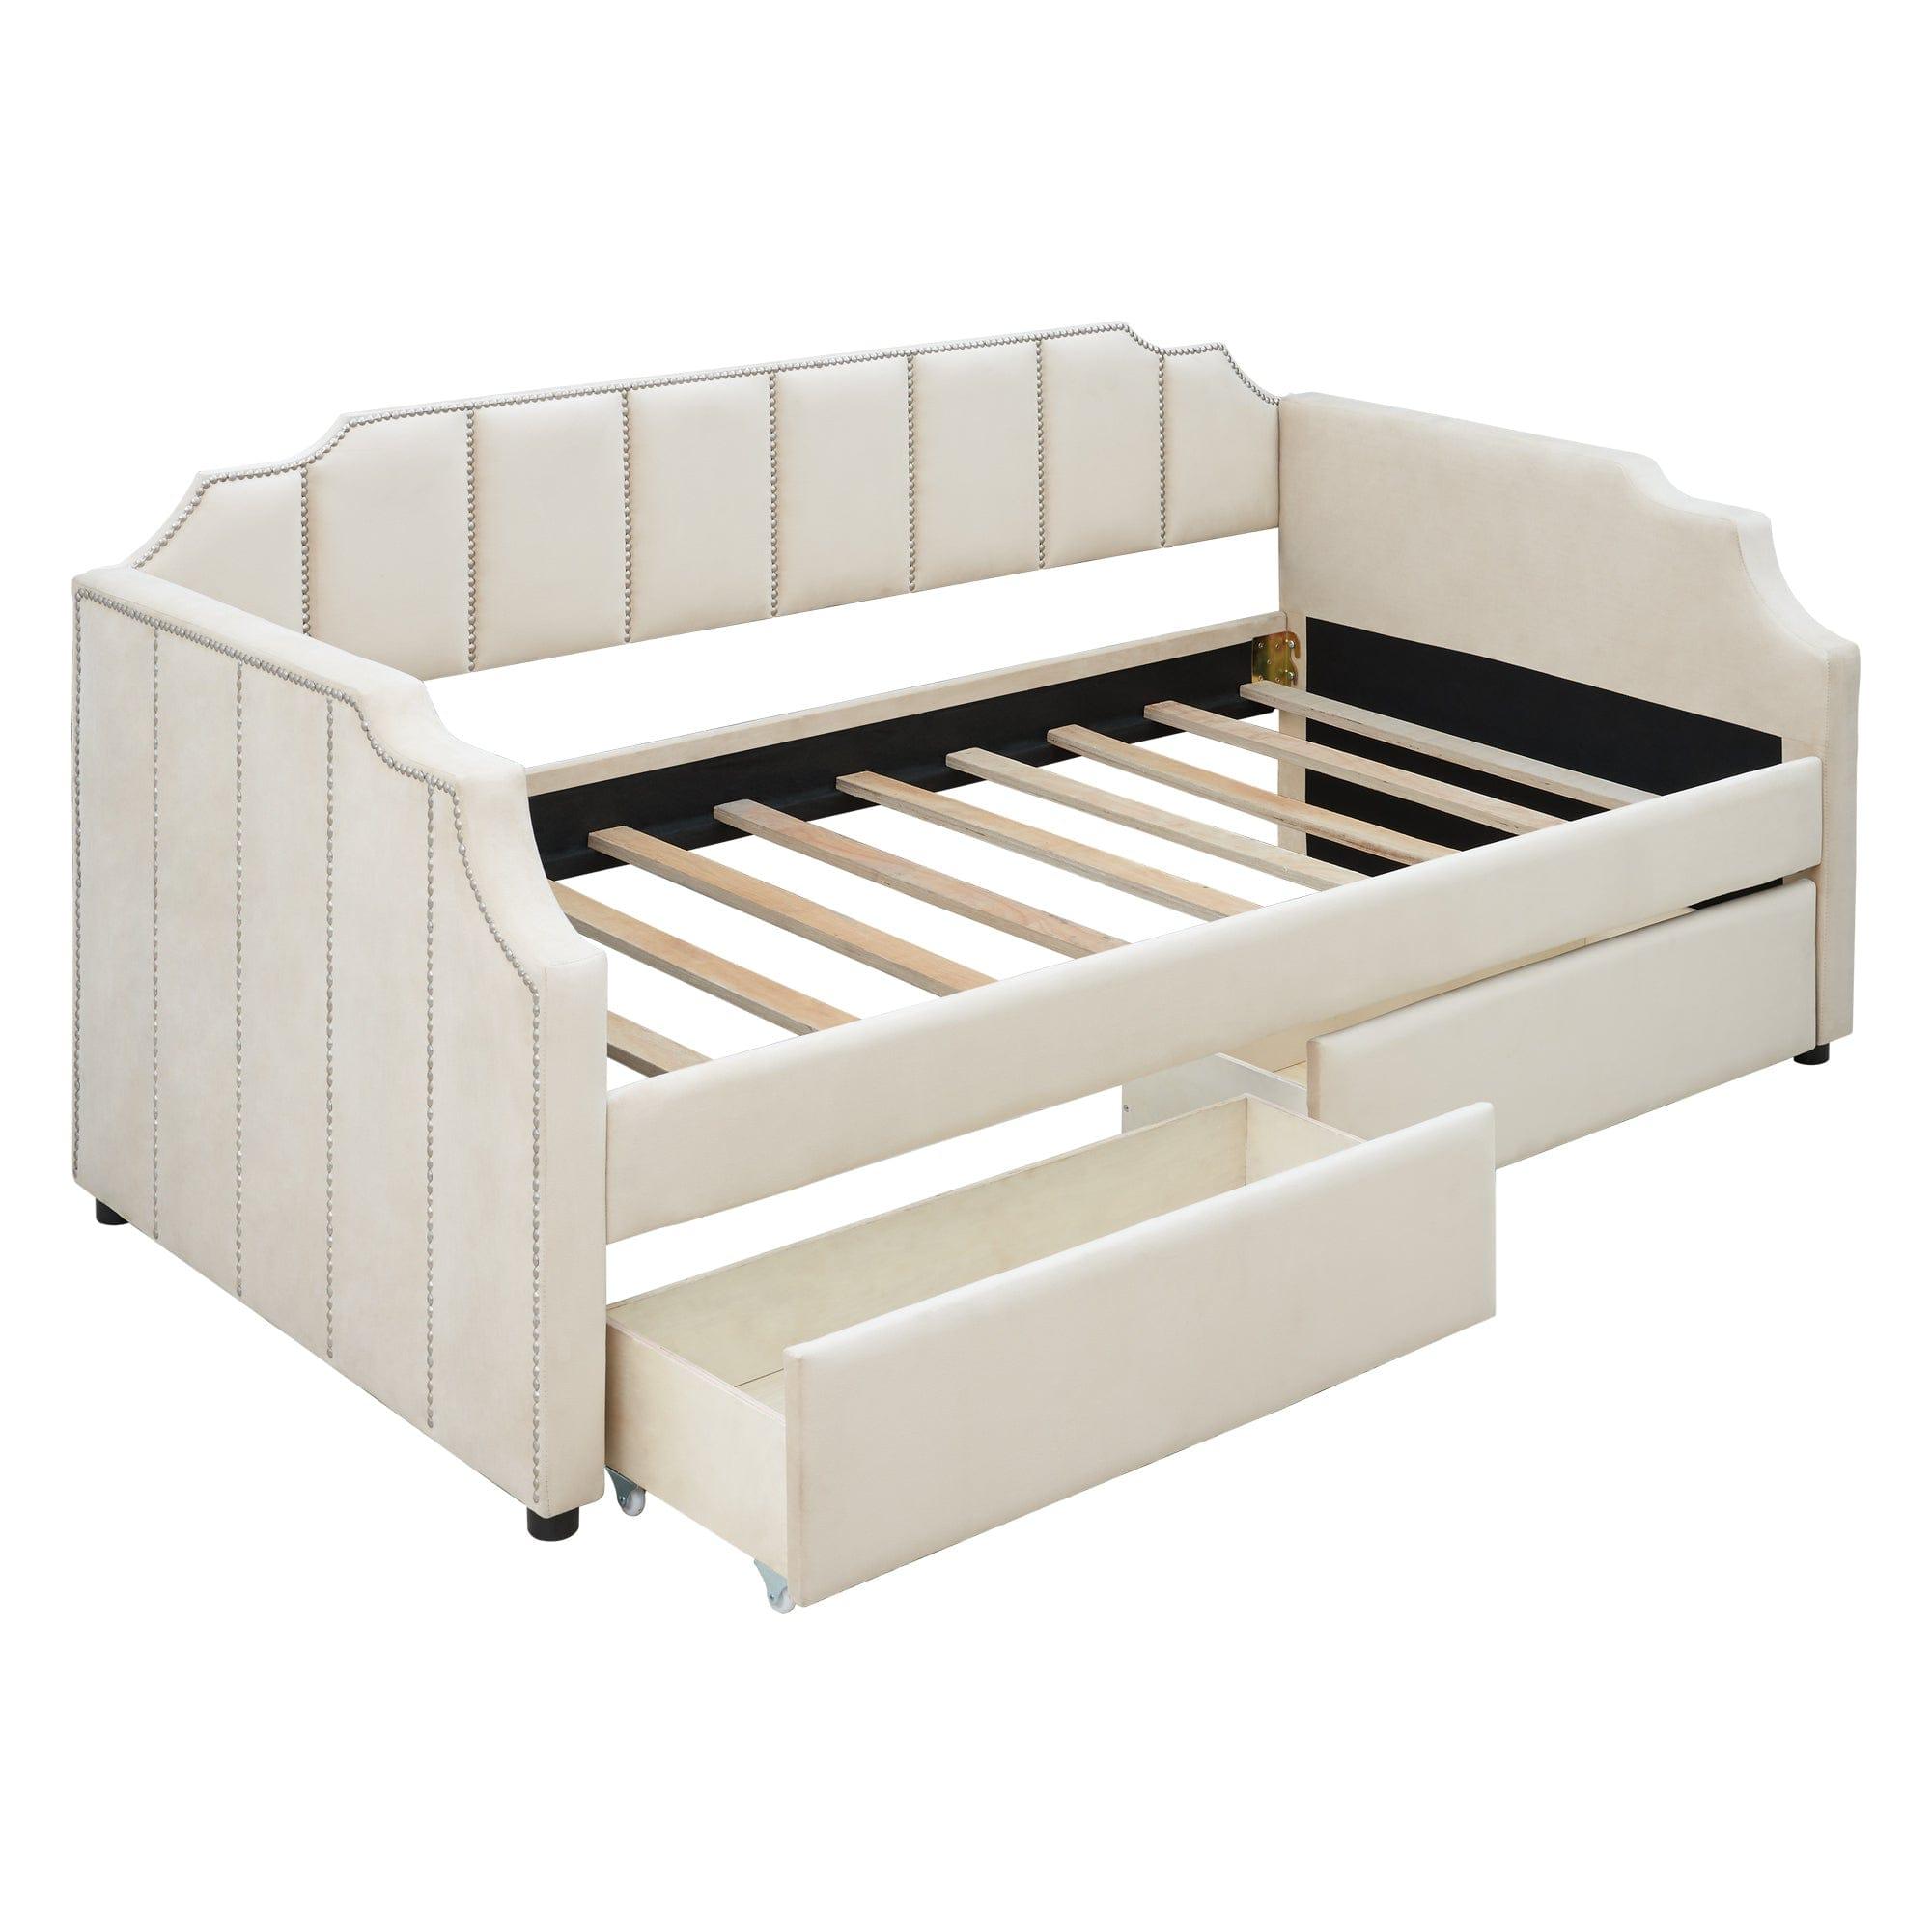 Shop Twin Size Upholstered daybed with Drawers, Wood Slat Support, Beige Mademoiselle Home Decor